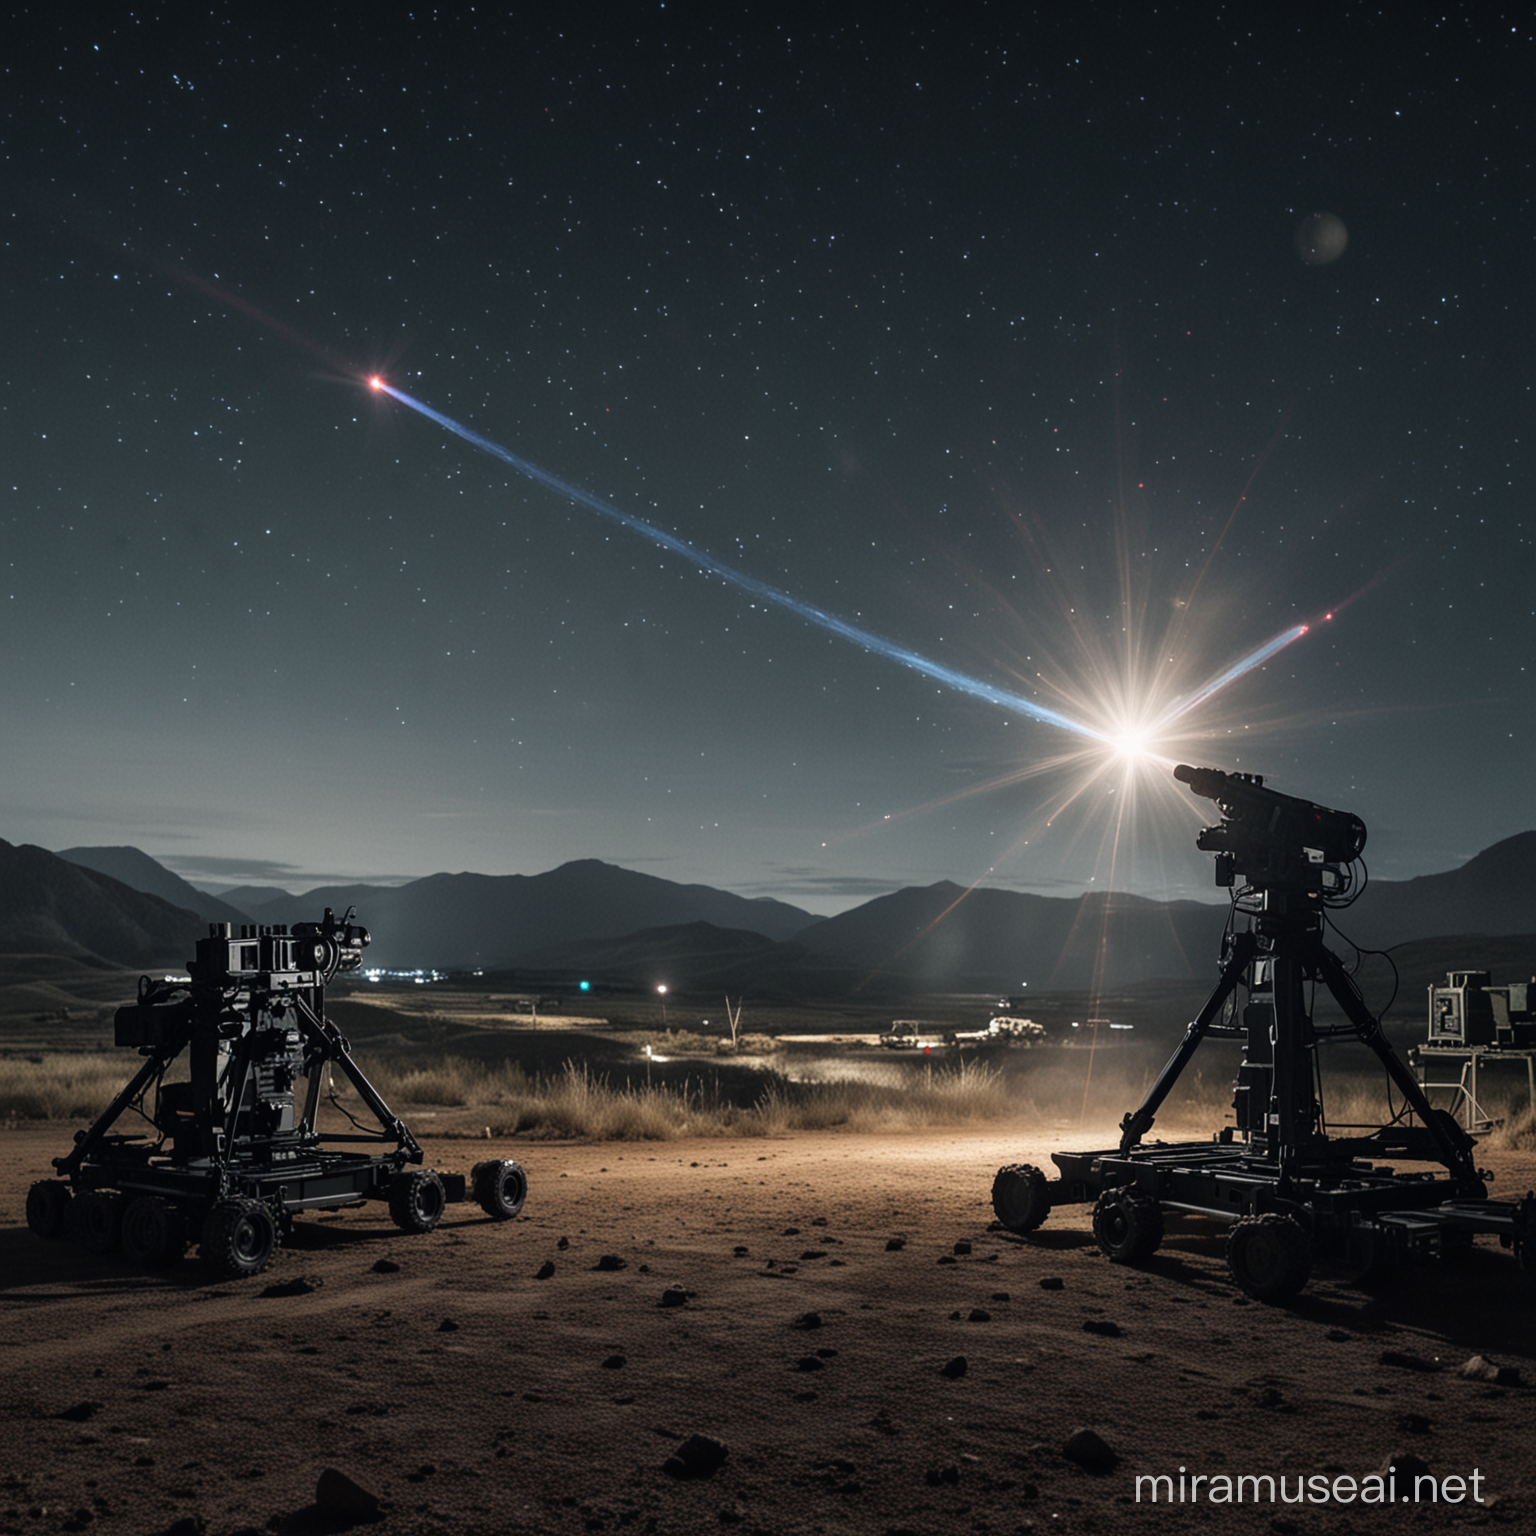 Nighttime Military Laser Weapons Drill in Remote Location